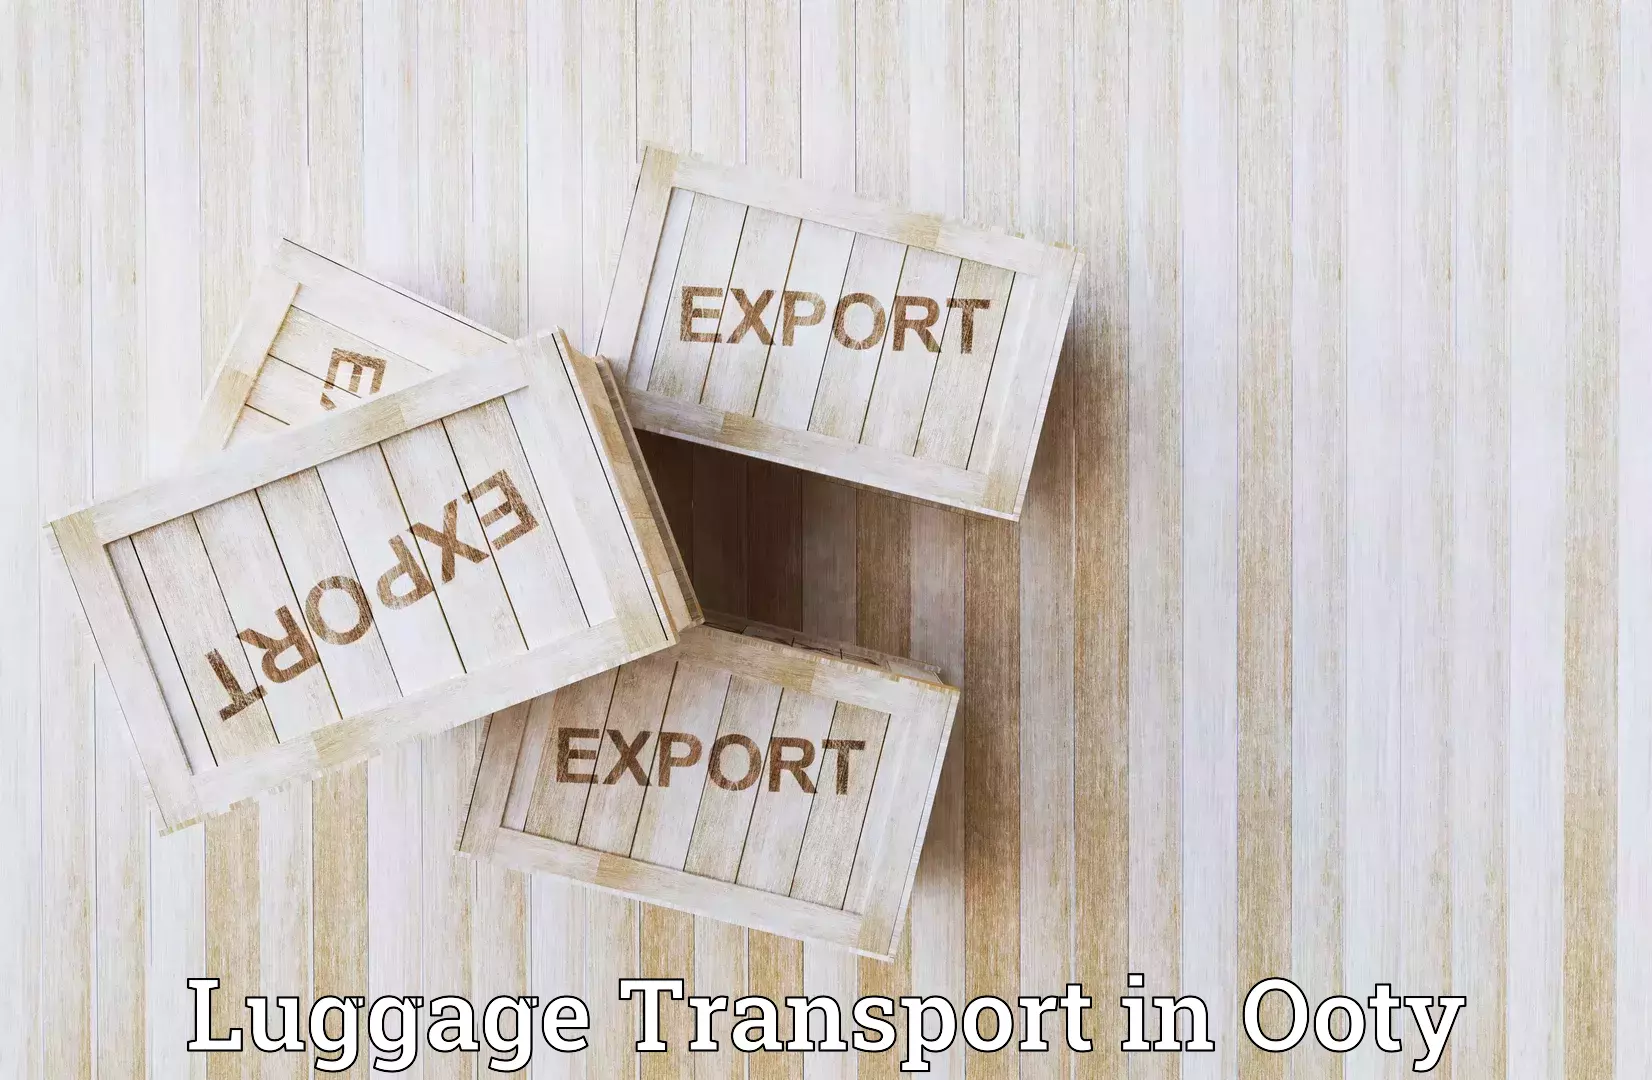 Luggage transport pricing in Ooty